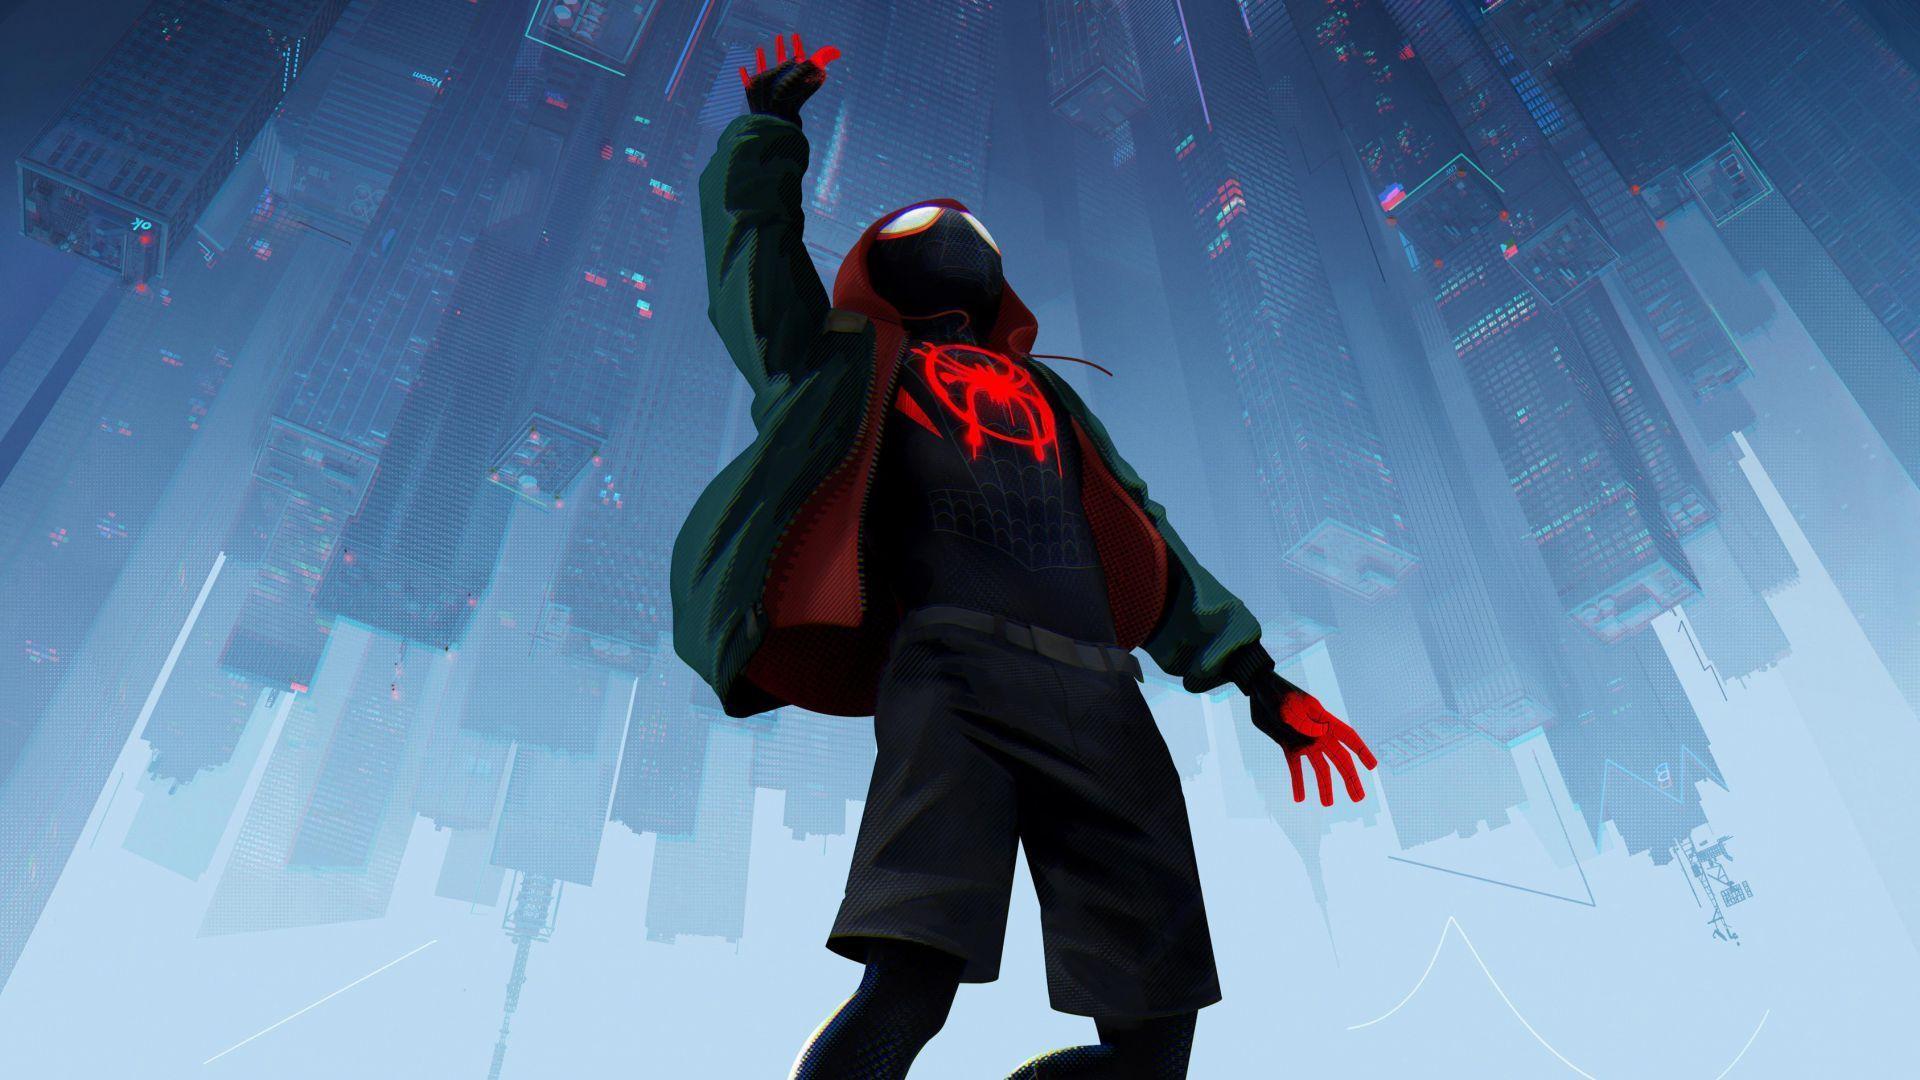 Download Wallpaper Of Spider Man: Into The Spider Verse, Animated